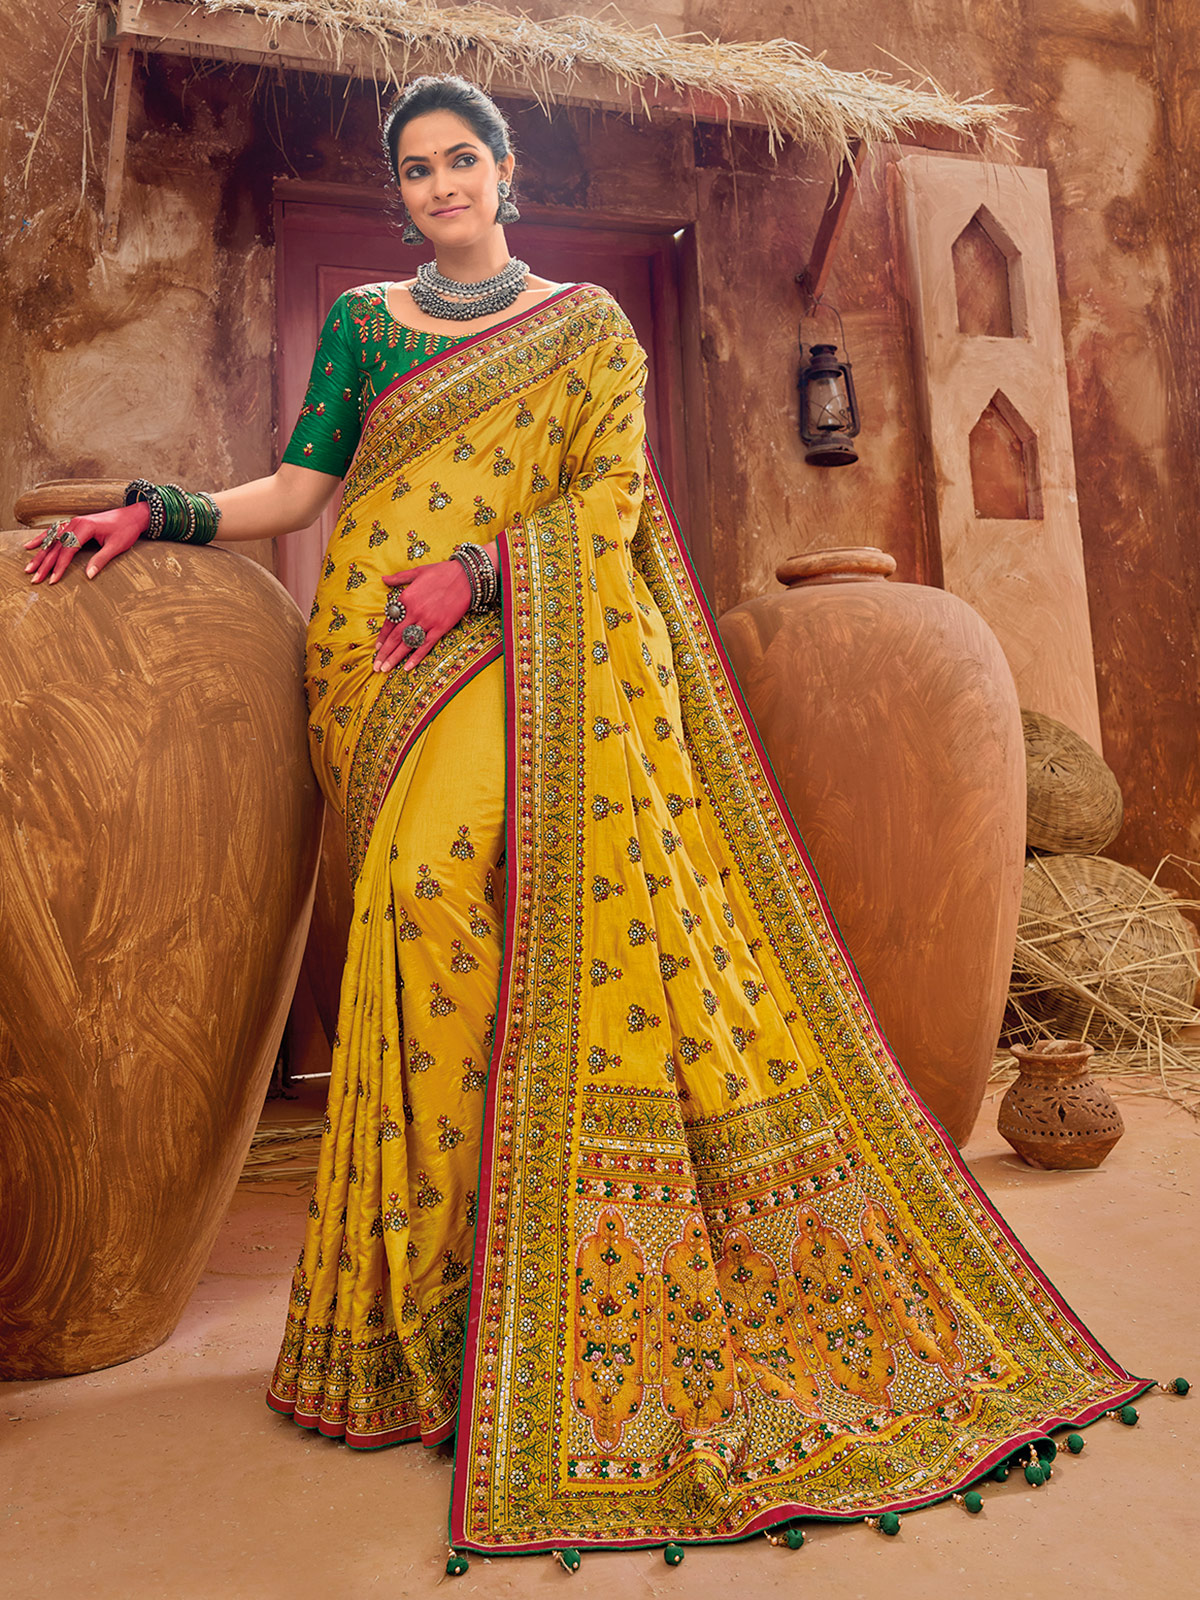 Empire Yellow Satin Saree With Embroidery Border | Singhania's